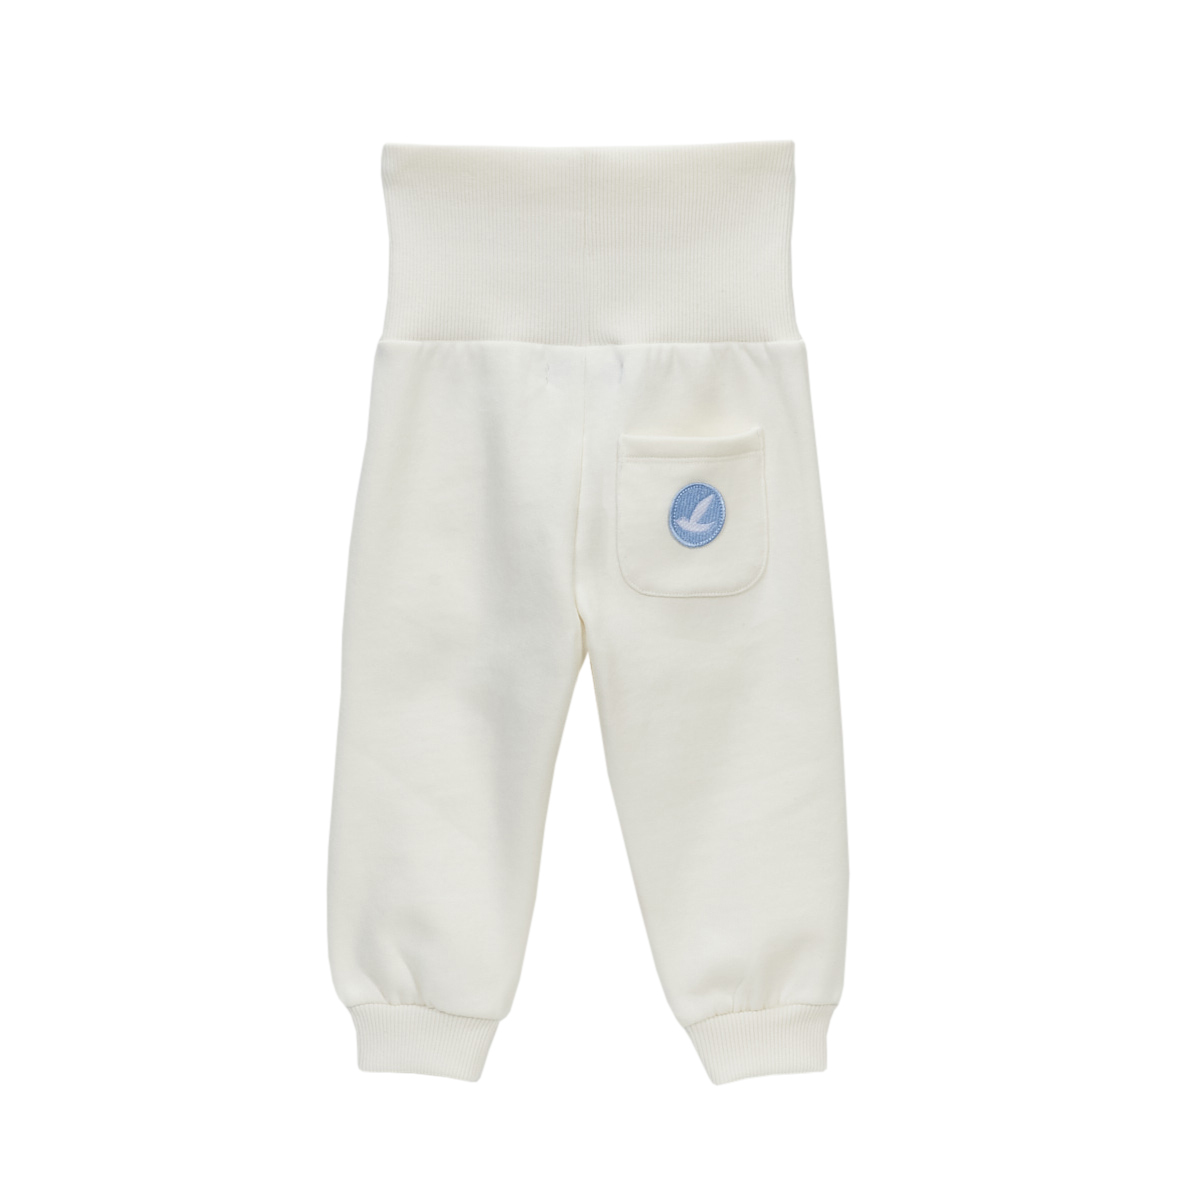 Baby Pants / off white / blue